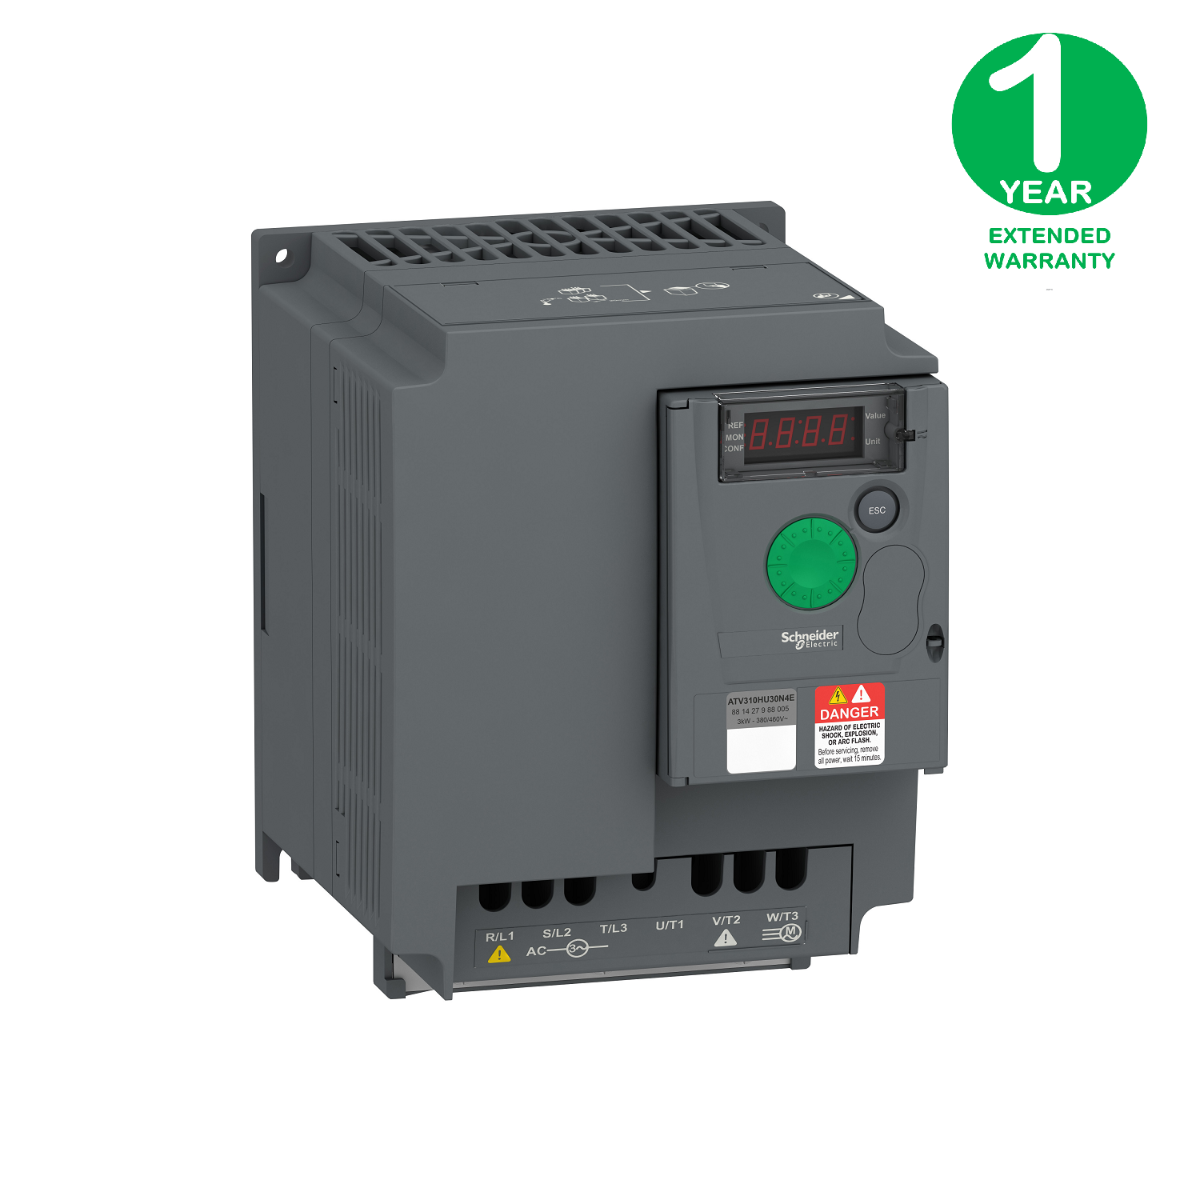 variable speed drive ATV310, 3 kW, 4 hp, 380...460 V, 3 phase, without filter + Extended Warranty 1 year